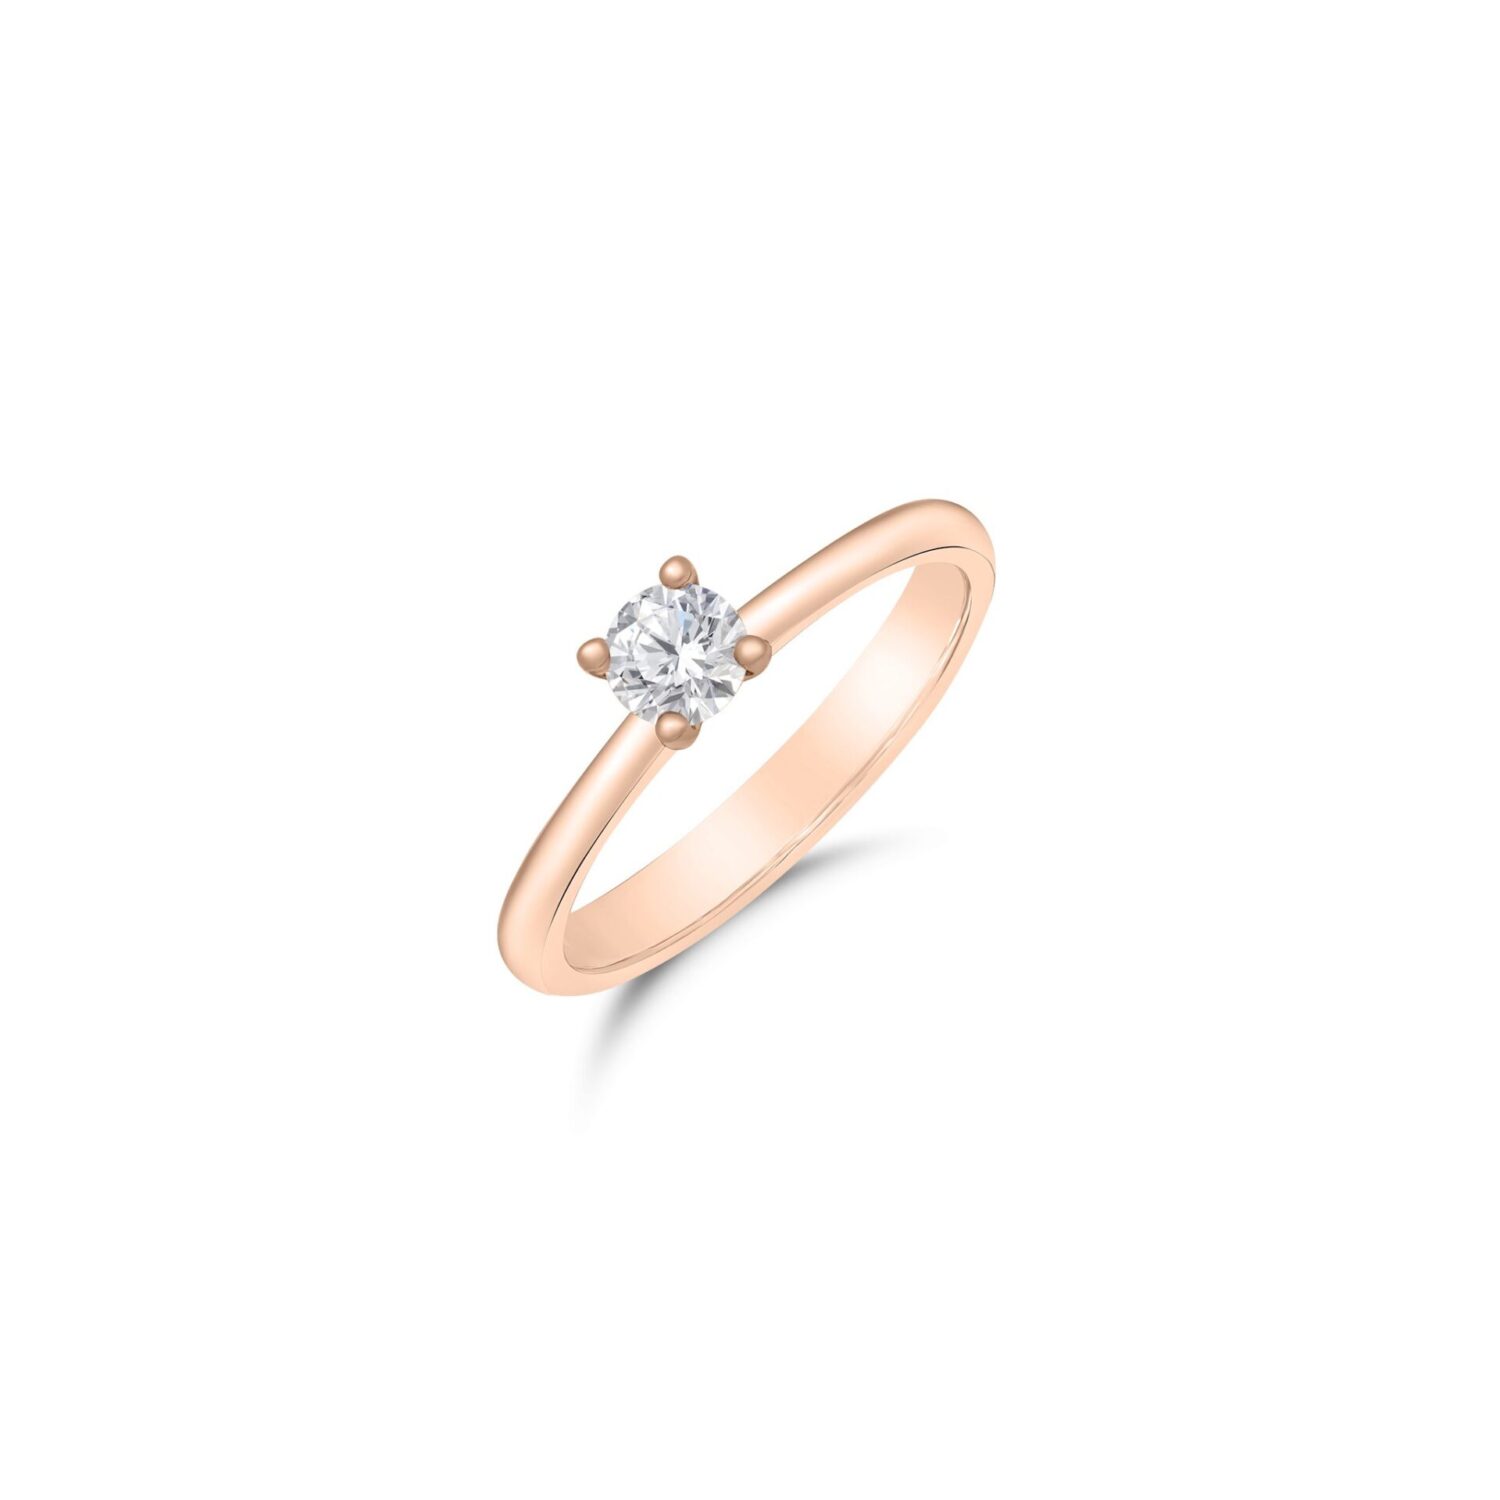 Lab grown diamonds in Cyprus - Profile Diamond Ring Square 0.3 Carat - Rose Gold best quality and price